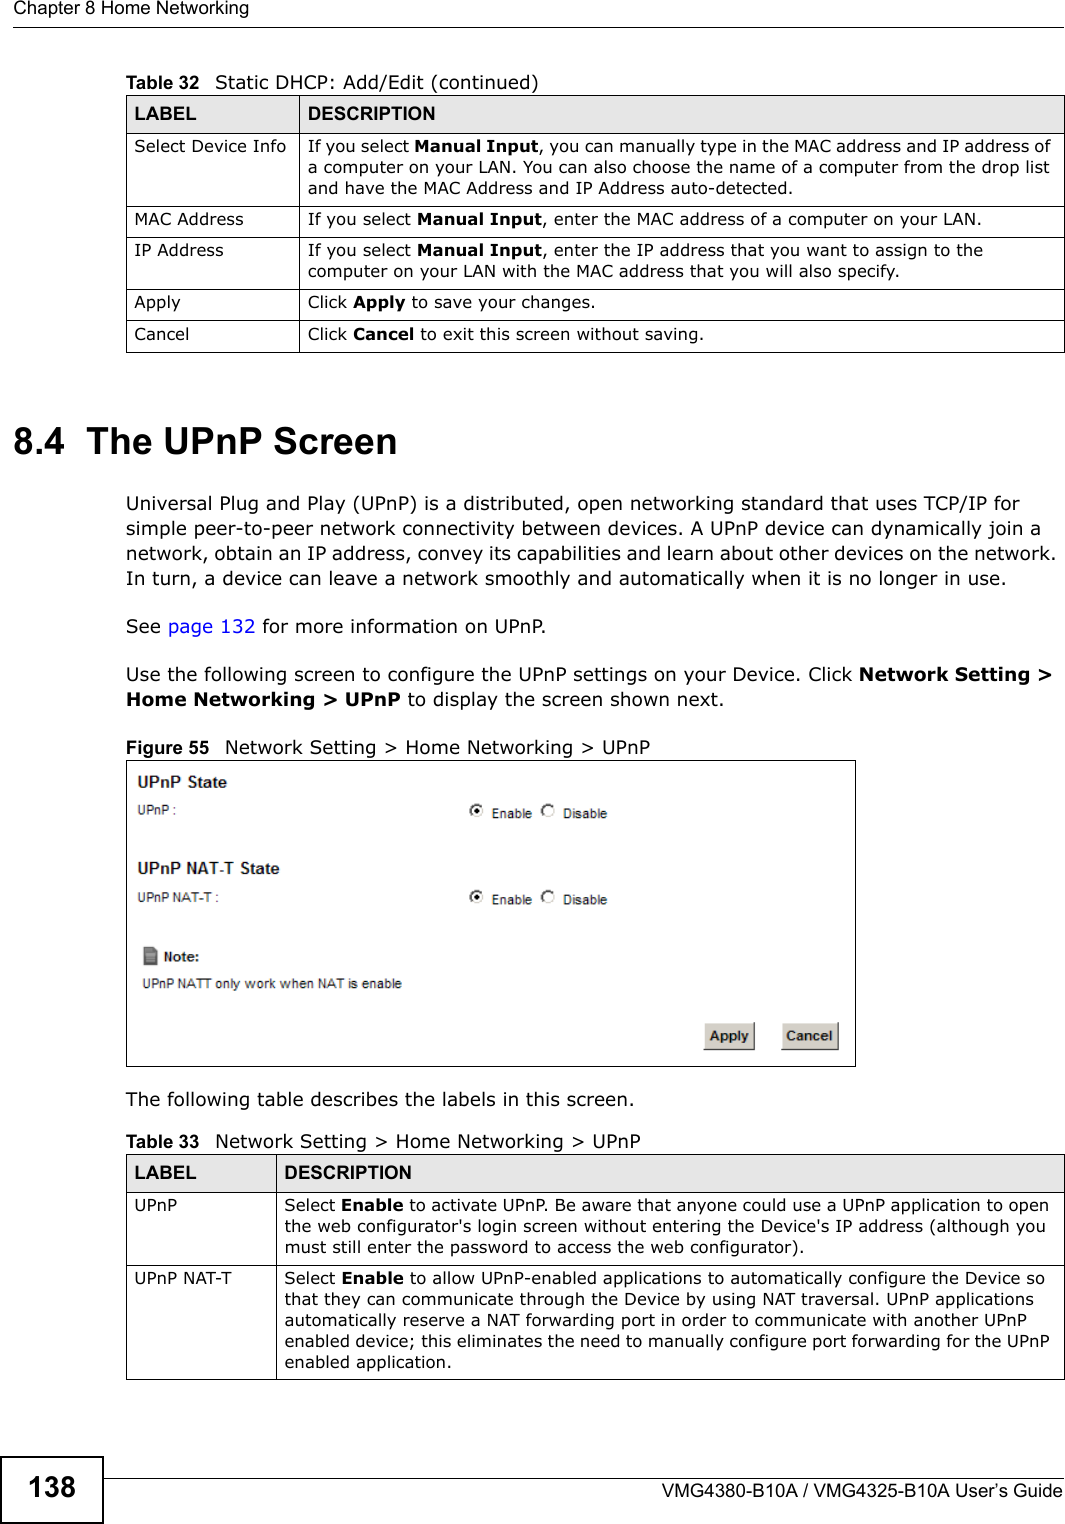 Chapter 8 Home NetworkingVMG4380-B10A / VMG4325-B10A User’s Guide1388.4  The UPnP ScreenUniversal Plug and Play (UPnP) is a distributed, open networking standard that uses TCP/IP for simple peer-to-peer network connectivity between devices. A UPnP device can dynamically join a network, obtain an IP address, convey its capabilities and learn about other devices on the network. In turn, a device can leave a network smoothly and automatically when it is no longer in use.See page 132 for more information on UPnP.Use the following screen to configure the UPnP settings on your Device. Click Network Setting &gt; Home Networking &gt; UPnP to display the screen shown next.Figure 55   Network Setting &gt; Home Networking &gt; UPnPThe following table describes the labels in this screen.Select Device Info If you select Manual Input, you can manually type in the MAC address and IP address of a computer on your LAN. You can also choose the name of a computer from the drop listand have the MAC Address and IP Address auto-detected.MAC Address If you select Manual Input, enter the MAC address of a computer on your LAN.IP Address If you select Manual Input, enter the IP address that you want to assign to the computer on your LAN with the MAC address that you will also specify.Apply Click Apply to save your changes.Cancel Click Cancel to exit this screen without saving.Table 32   Static DHCP: Add/Edit (continued)LABEL DESCRIPTIONTable 33   Network Setting &gt; Home Networking &gt; UPnPLABEL DESCRIPTIONUPnP Select Enable to activate UPnP. Be aware that anyone could use a UPnP application to openthe web configurator&apos;s login screen without entering the Device&apos;s IP address (although youmust still enter the password to access the web configurator).UPnP NAT-T Select Enable to allow UPnP-enabled applications to automatically configure the Device sothat they can communicate through the Device by using NAT traversal. UPnP applicationsautomatically reserve a NAT forwarding port in order to communicate with another UPnP enabled device; this eliminates the need to manually configure port forwarding for the UPnP enabled application.